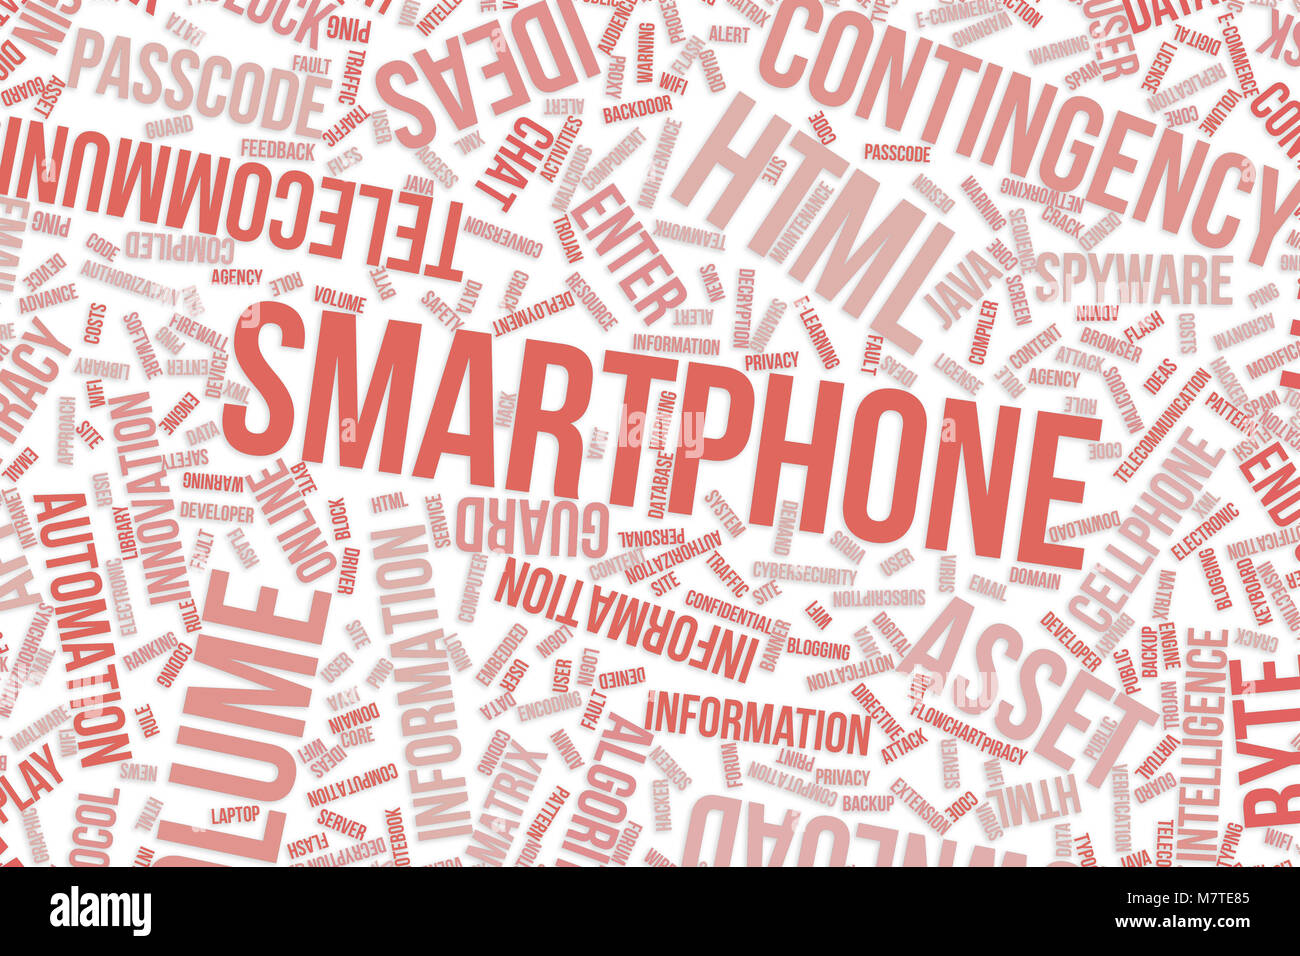 Smartphone, IT, information technology conceptual word cloud for for design wallpaper, texture or background Stock Photo